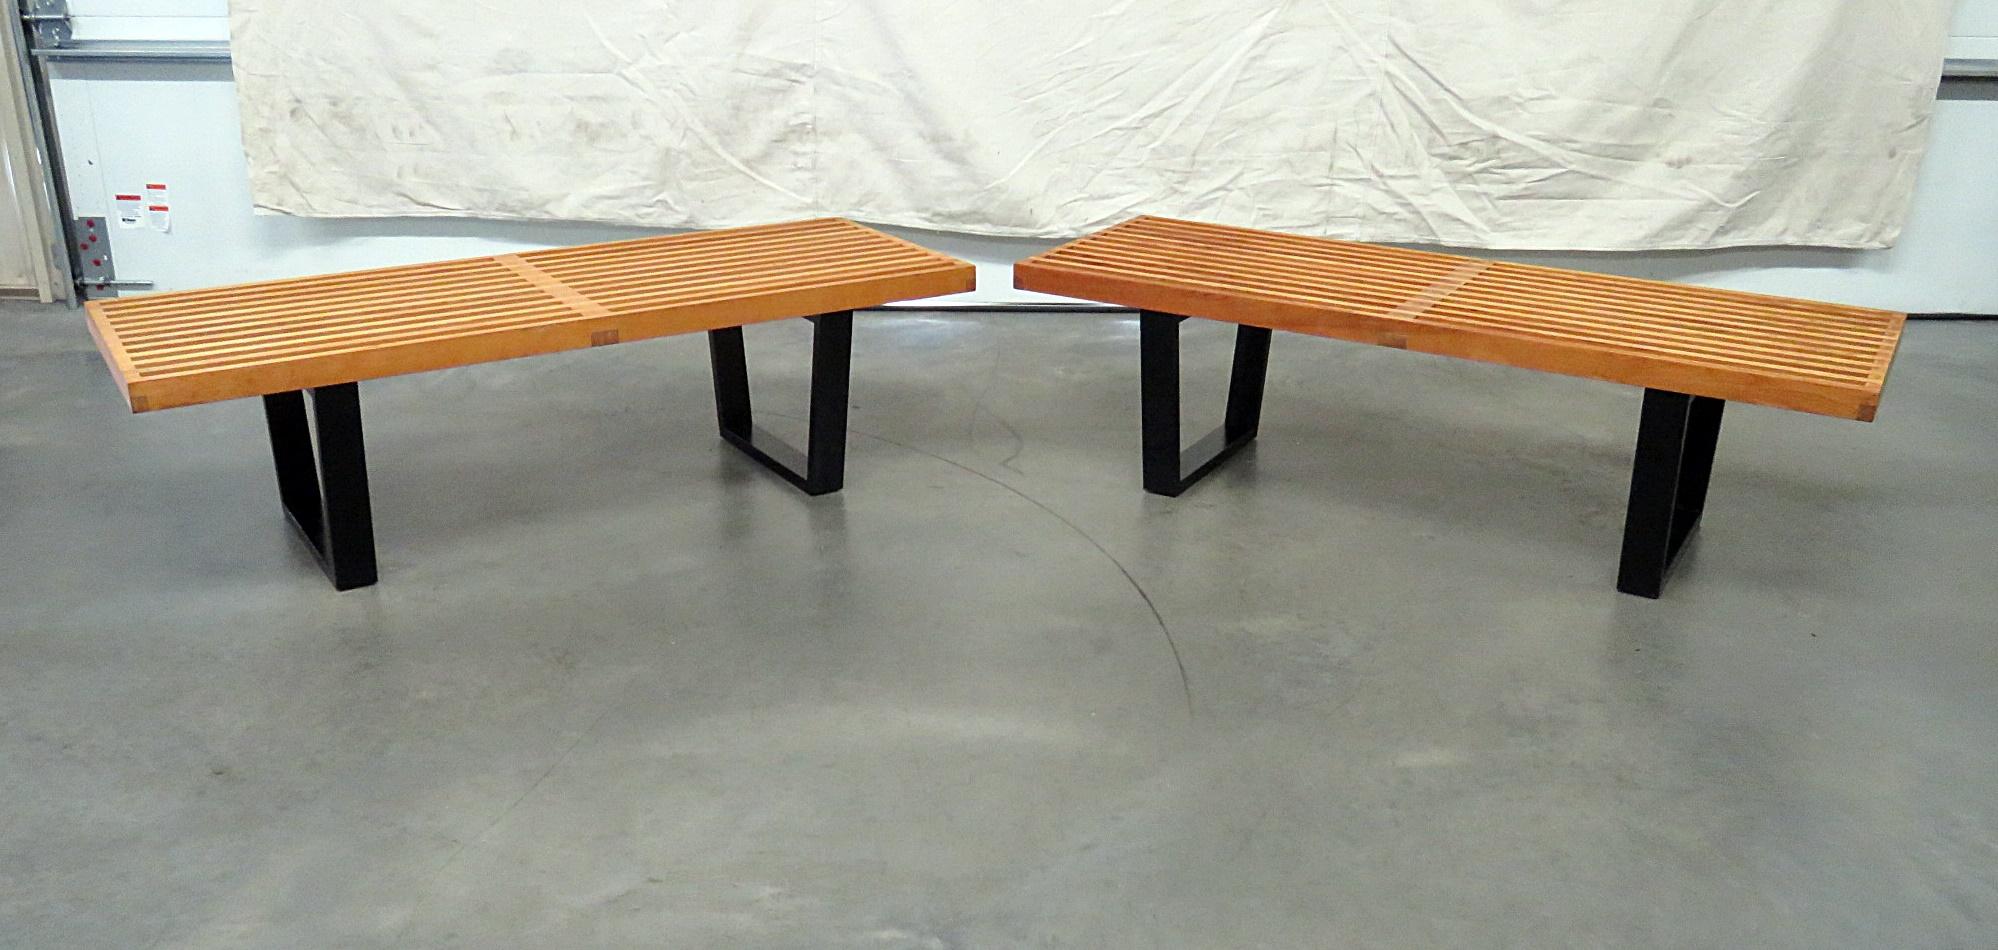 Pair of Mid-Century Modern benches, attributed to Herman Miller, with an ebonized base.